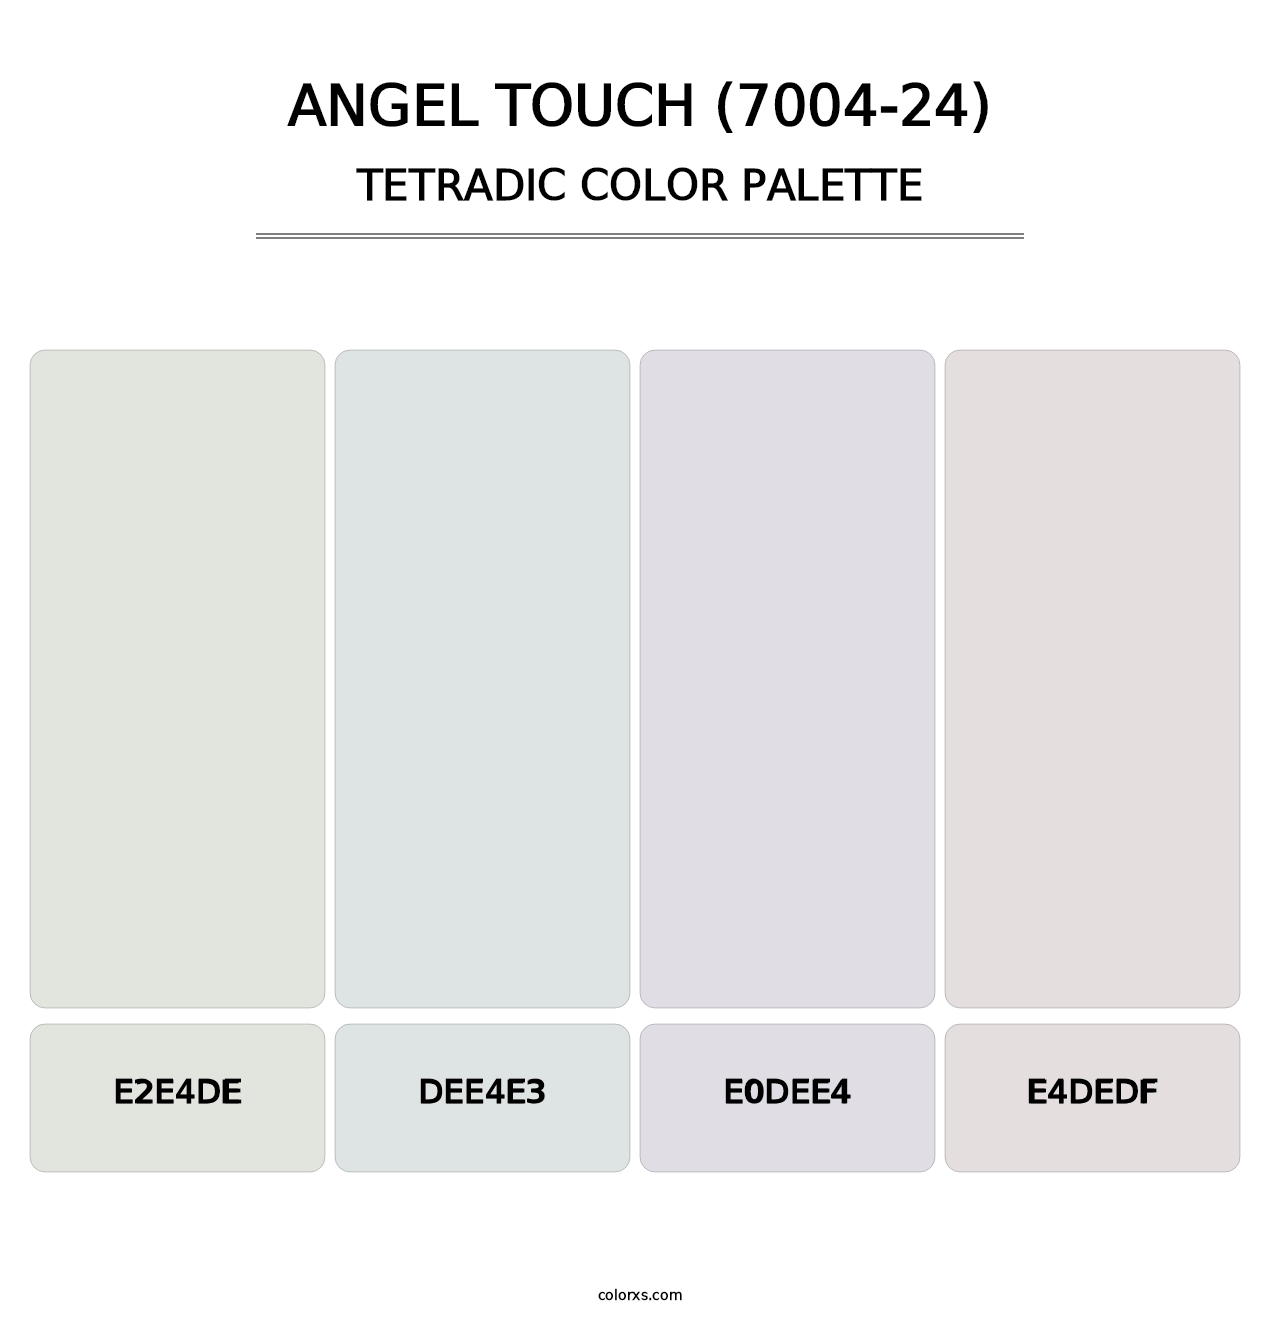 Angel Touch (7004-24) - Tetradic Color Palette